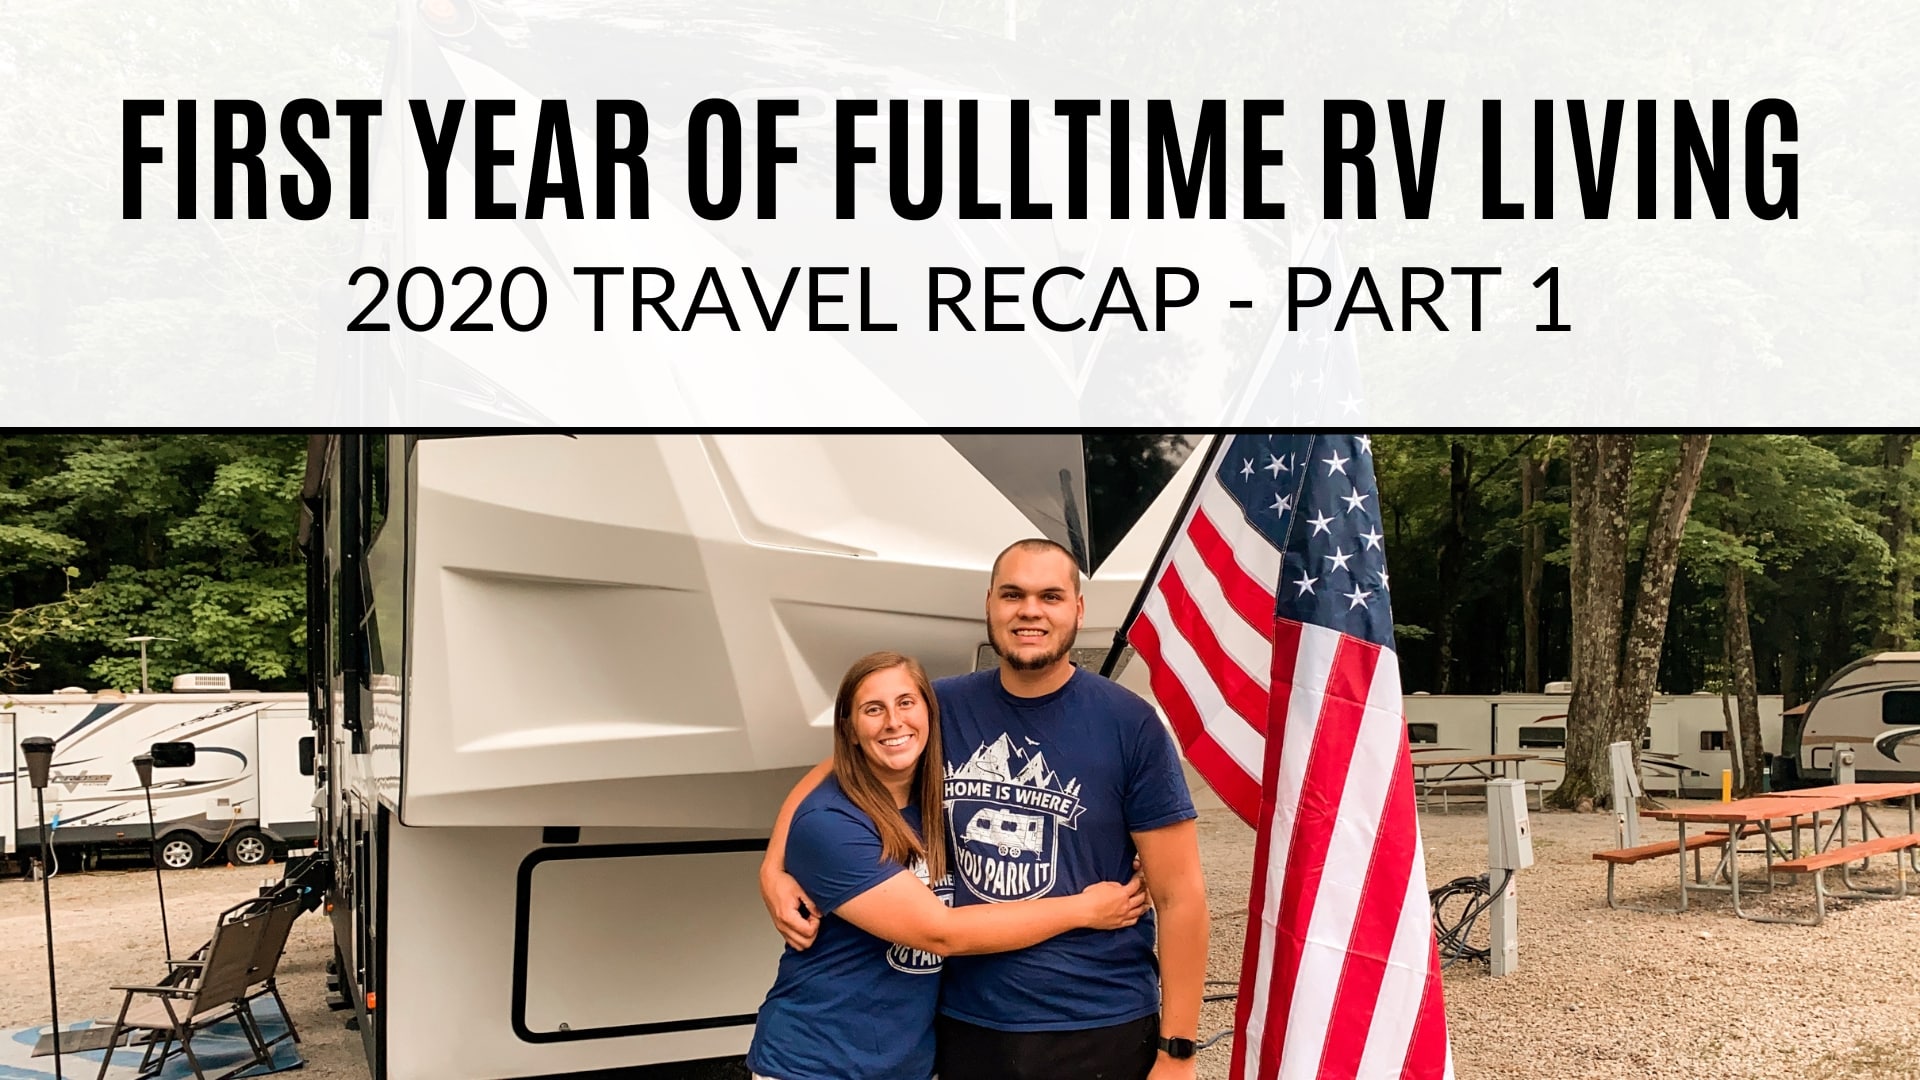 Philip and Megan stand in front of their fifth wheel RV next to an American flag. The text on the image says "First Year of Fulltime RV Living - 2020 Recap Part 1".